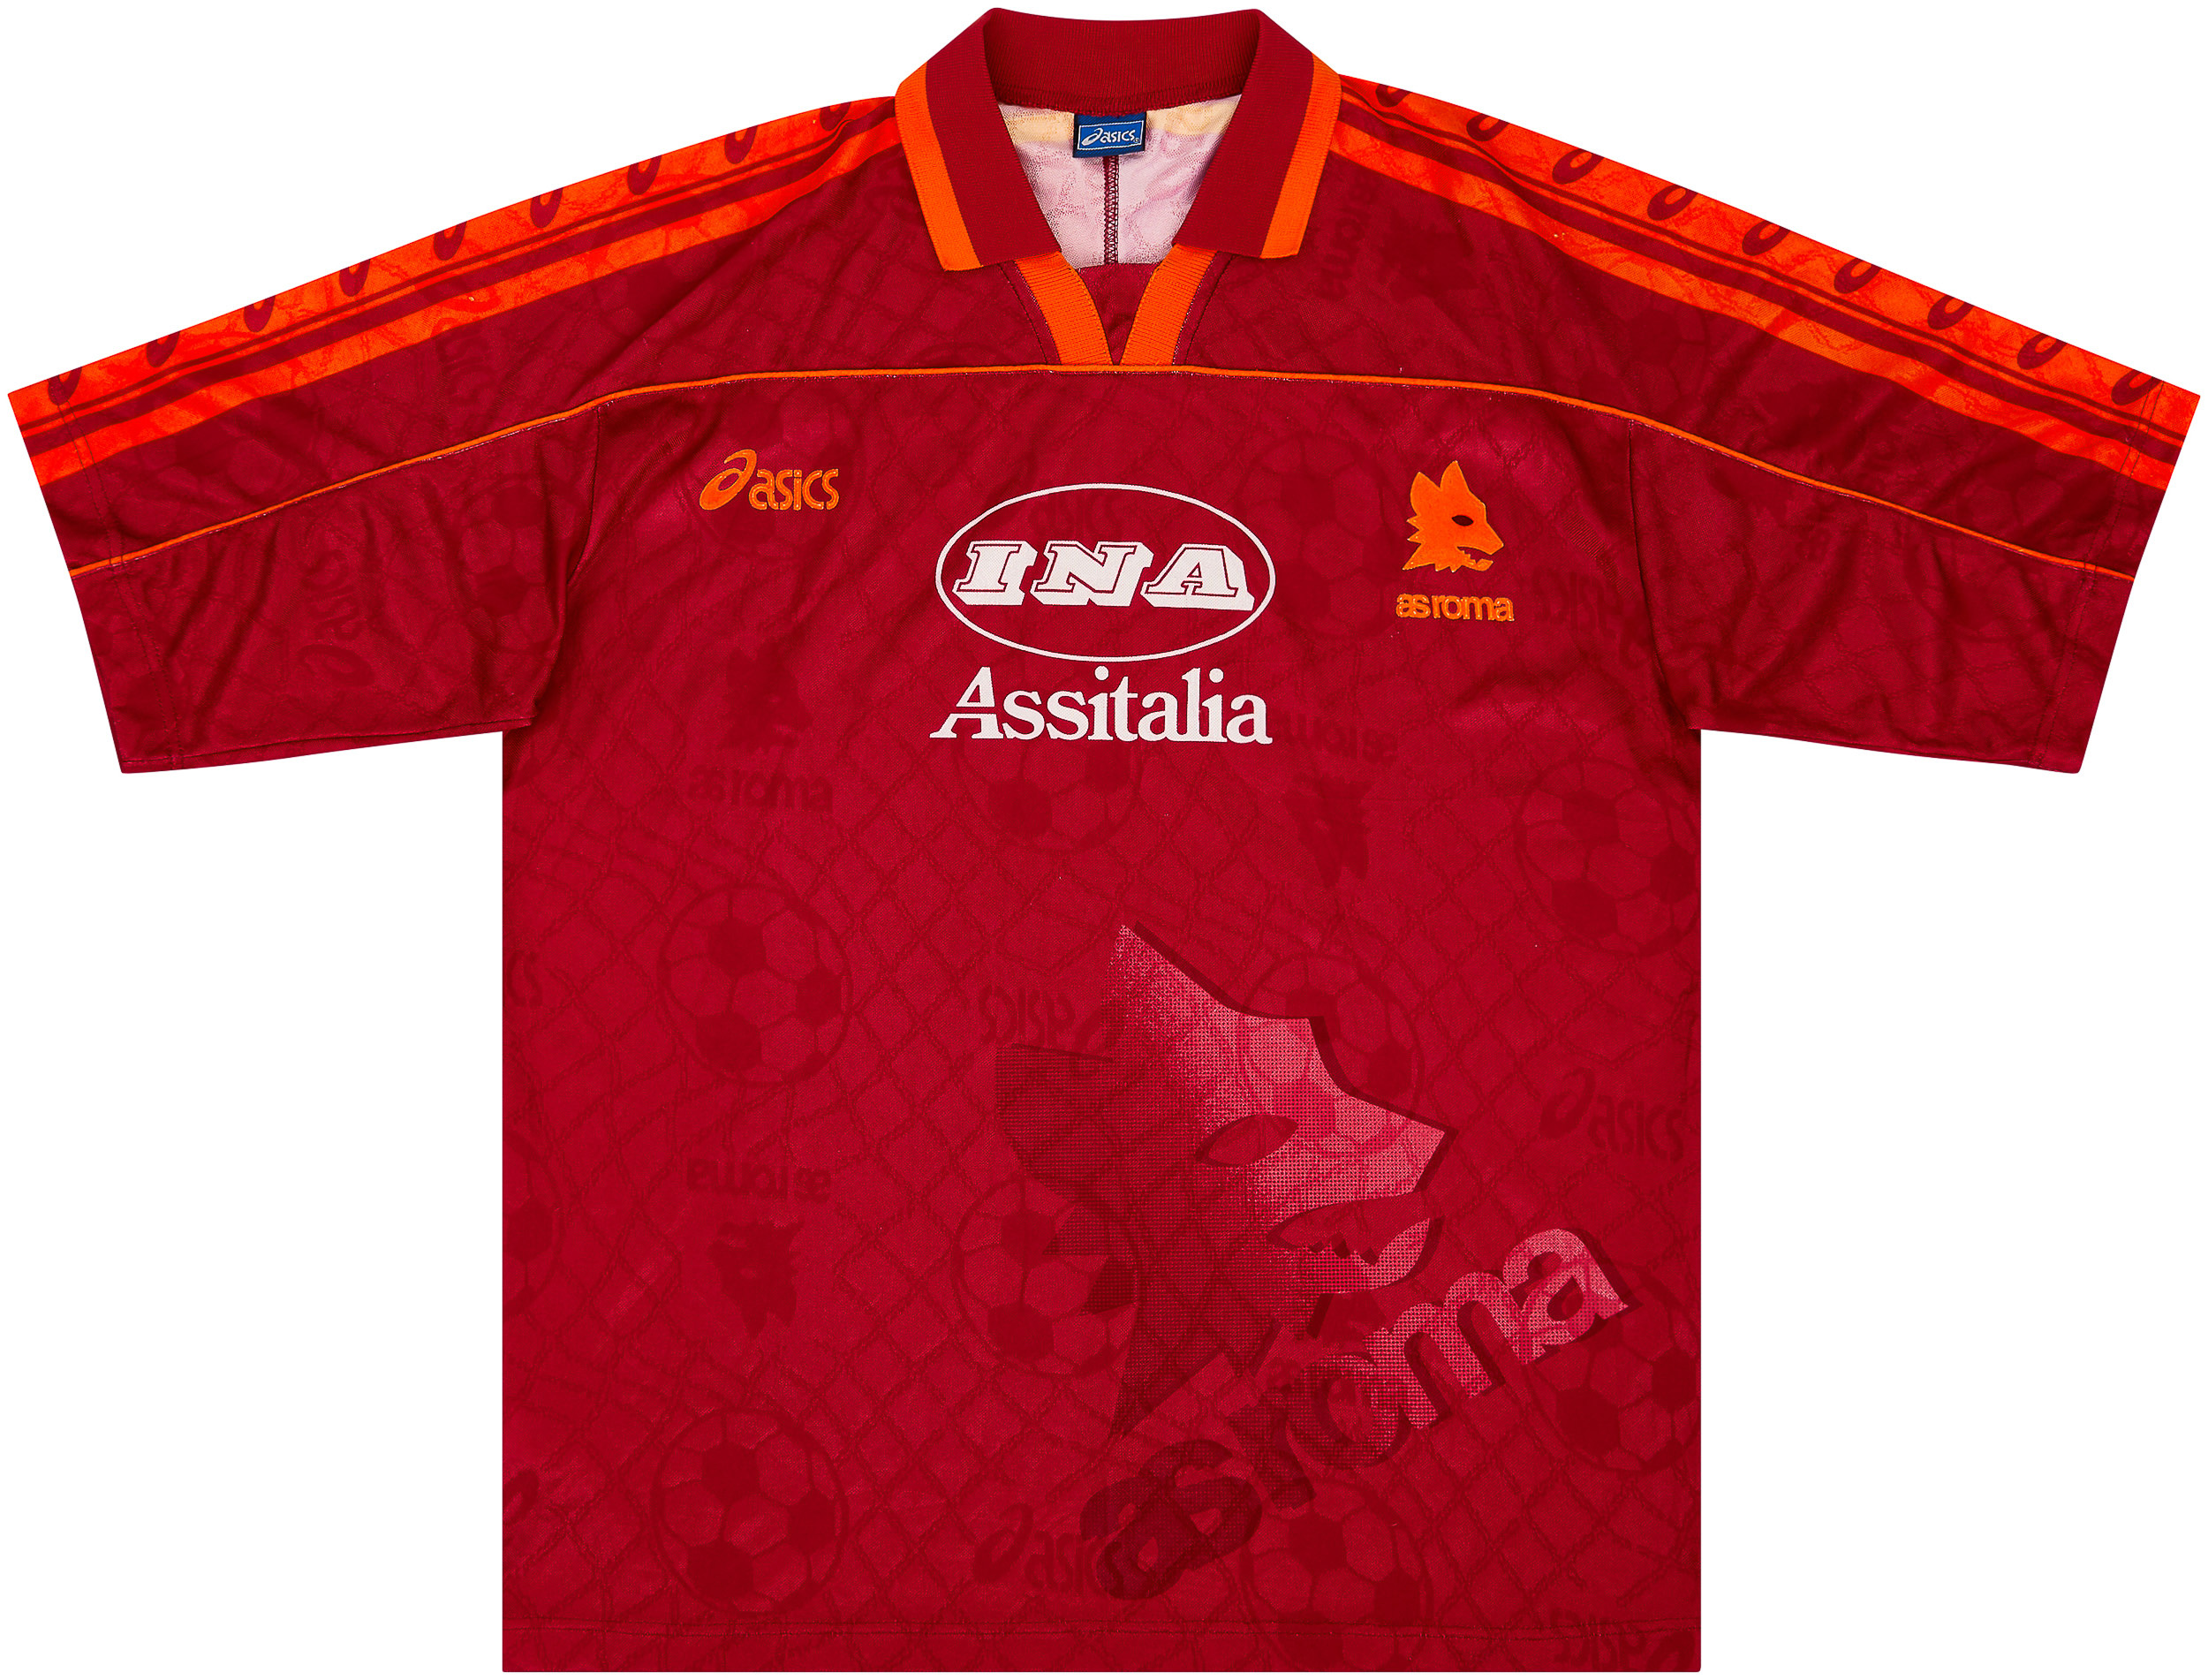 1995-96 Roma Home Shirt - Excellent 8/10 - ()